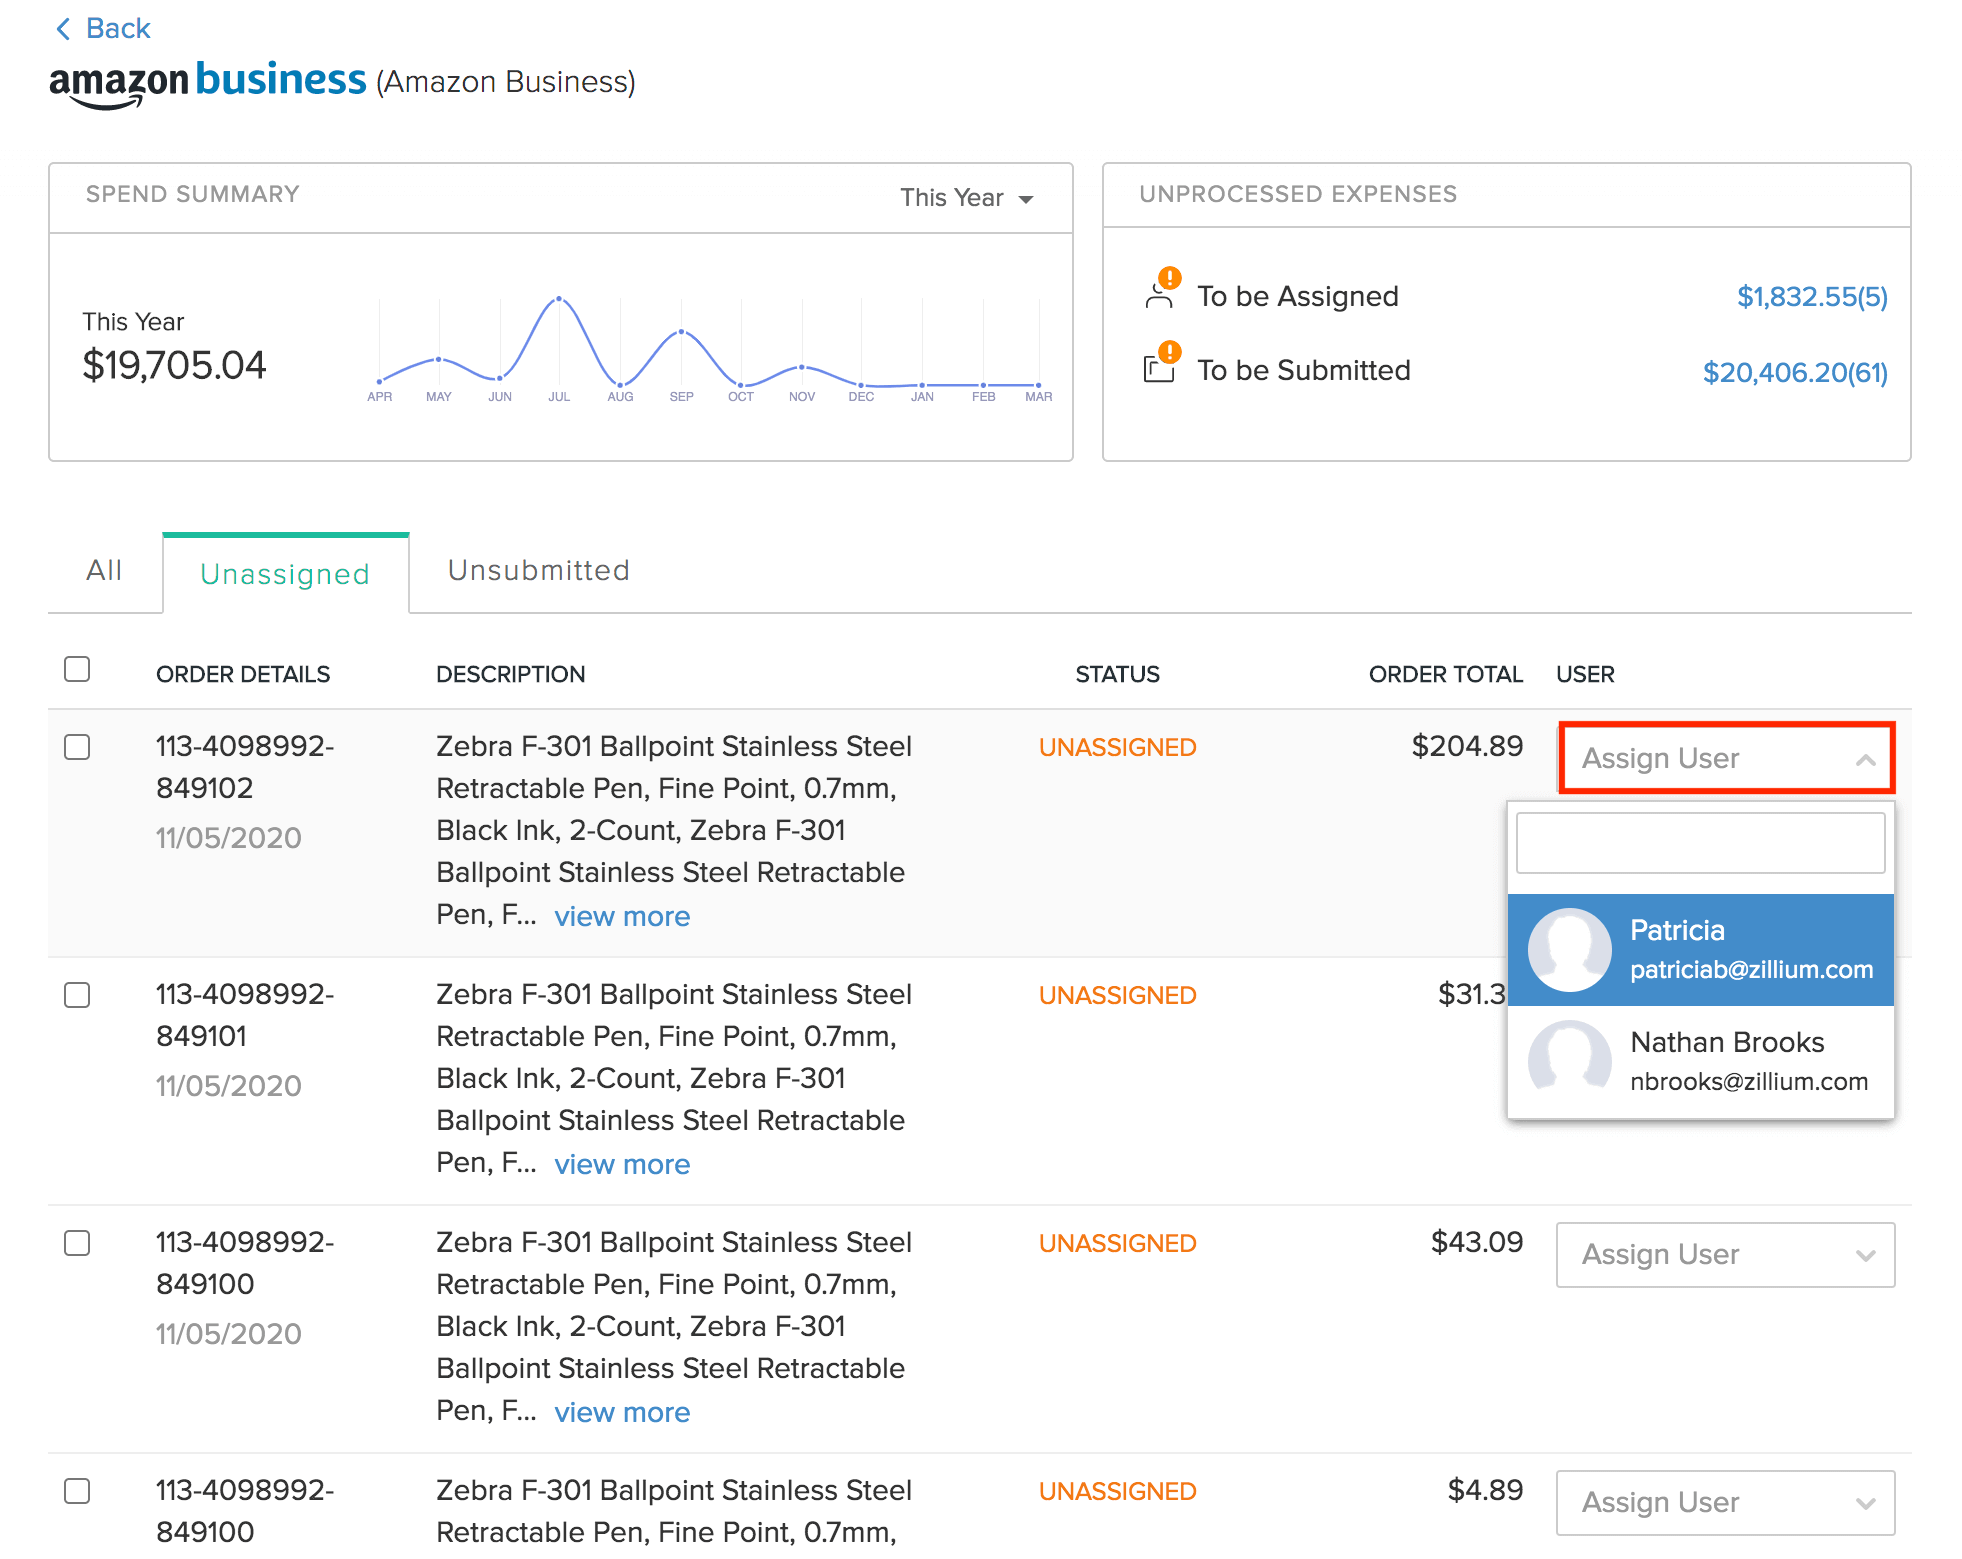 Assign expenses to users